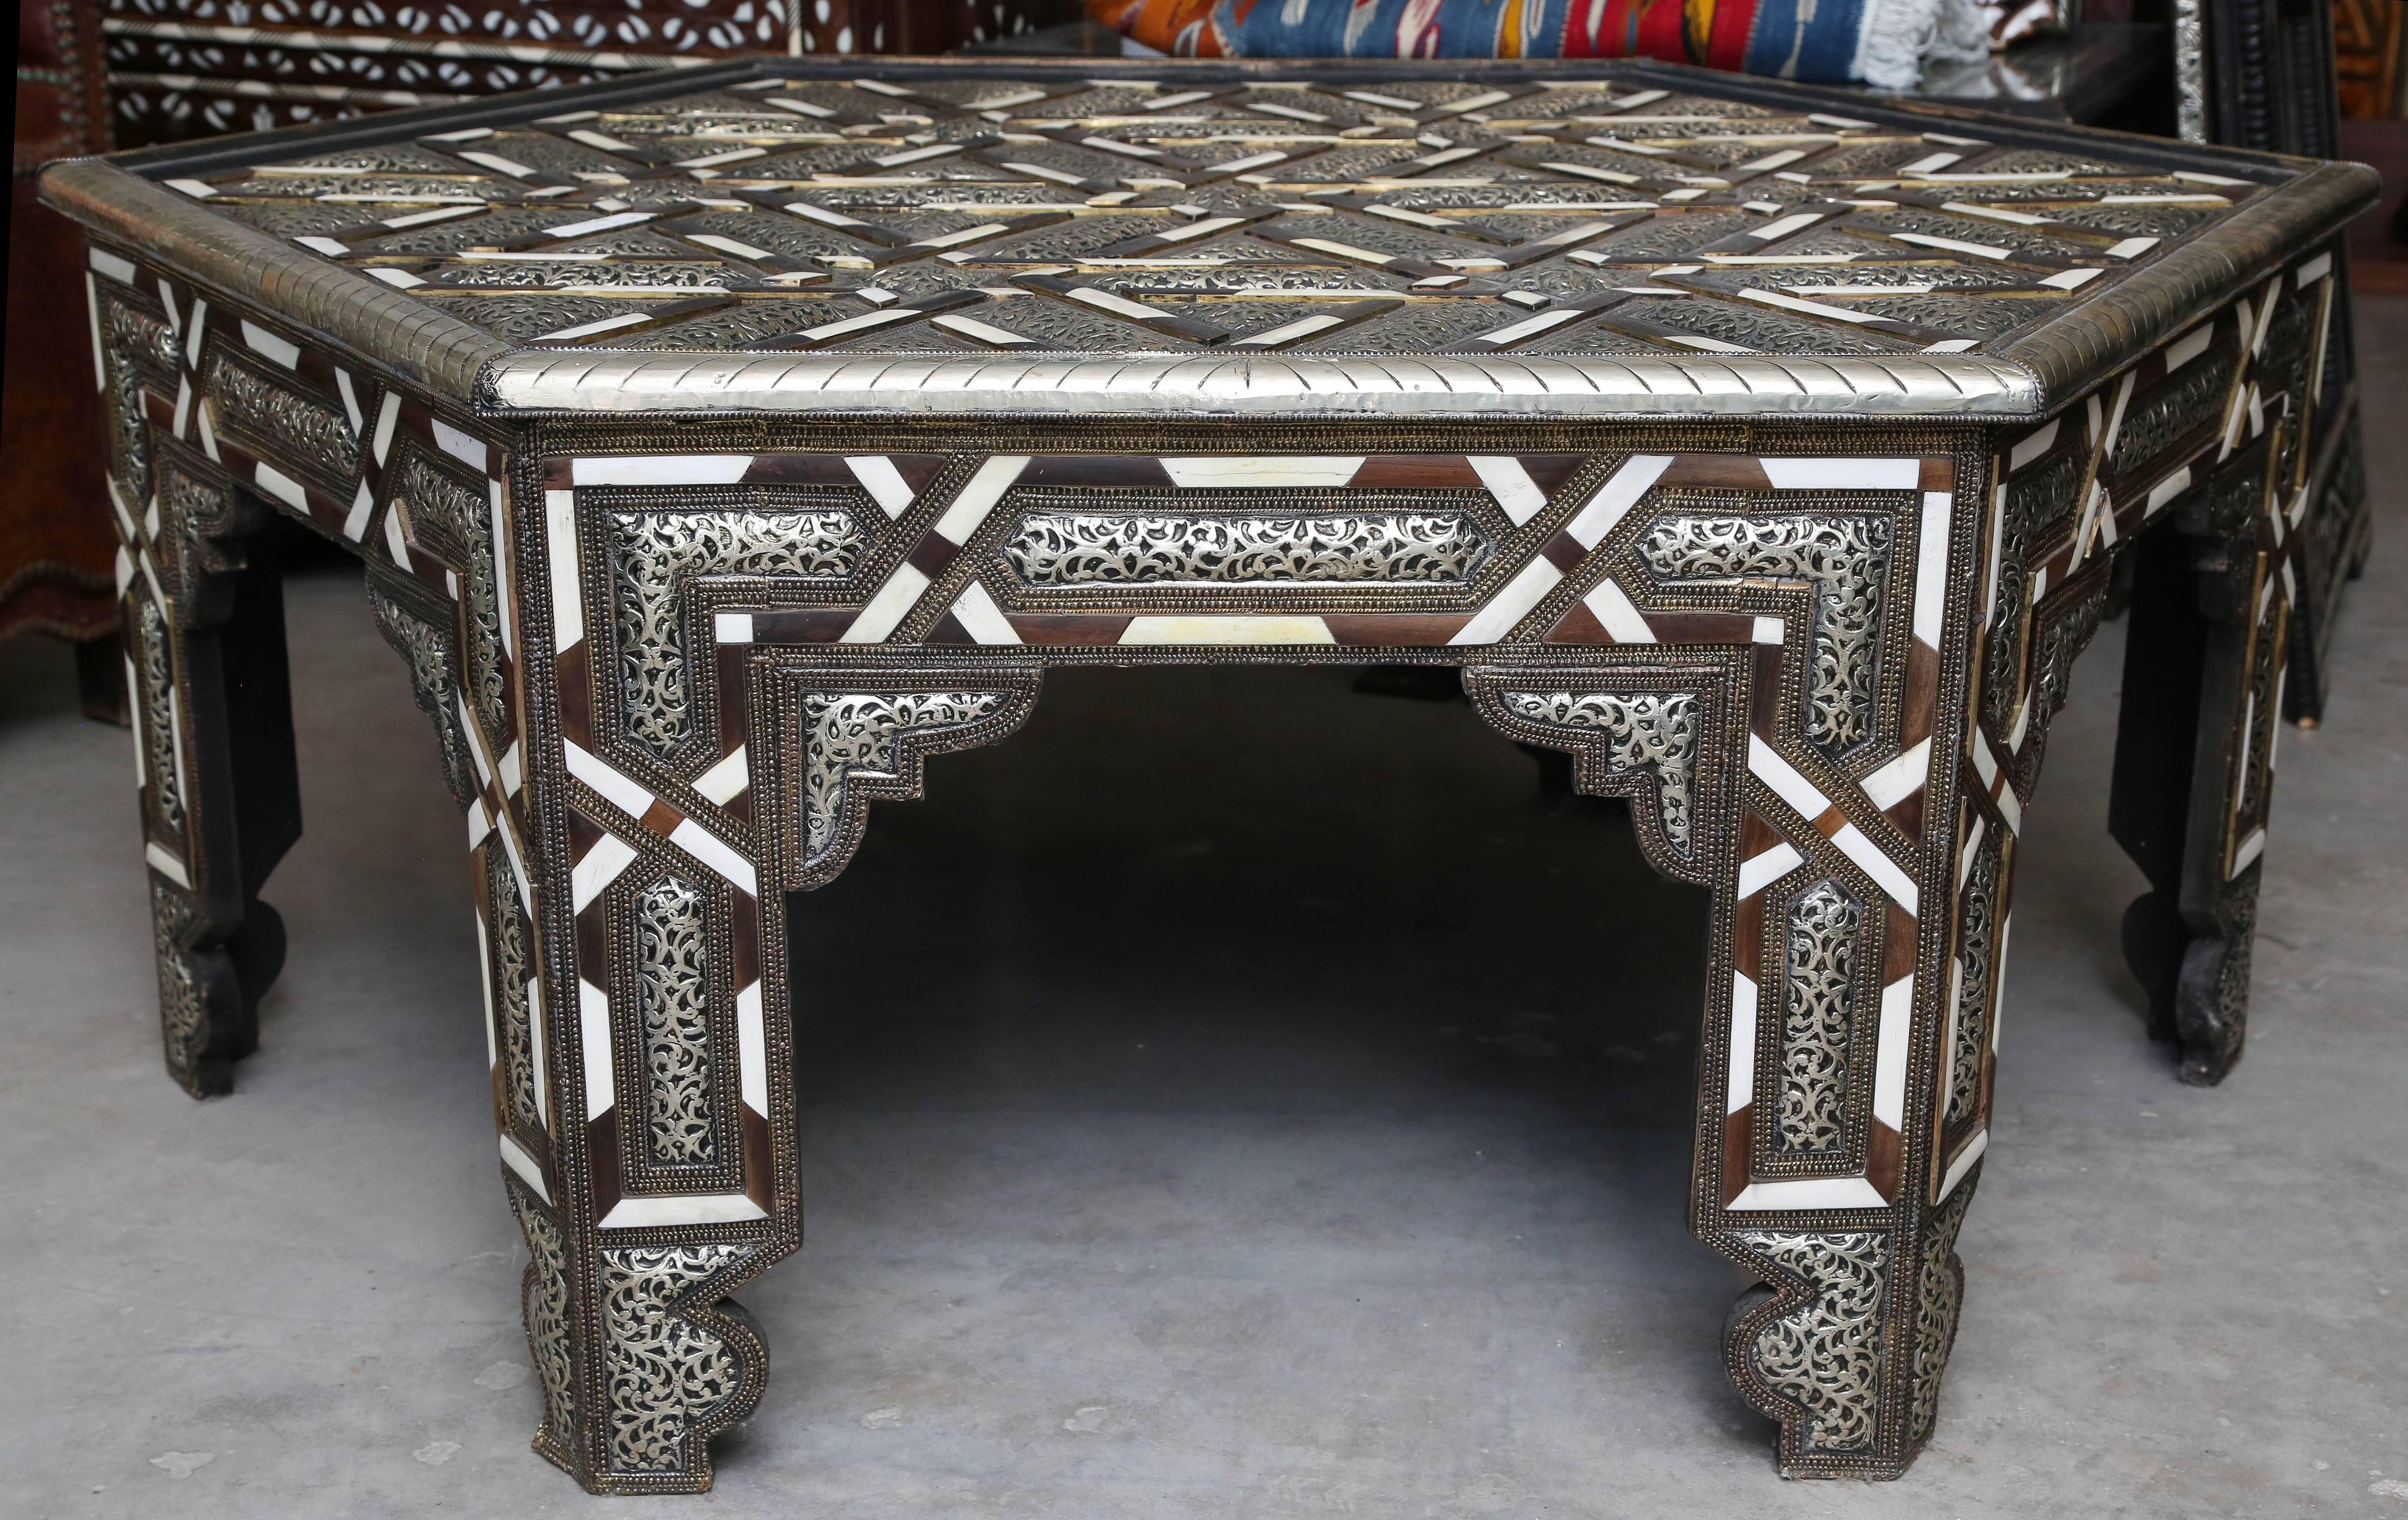 Superb Hexagonal Moroccan Coffee Table In Excellent Condition For Sale In West Palm Beach, FL